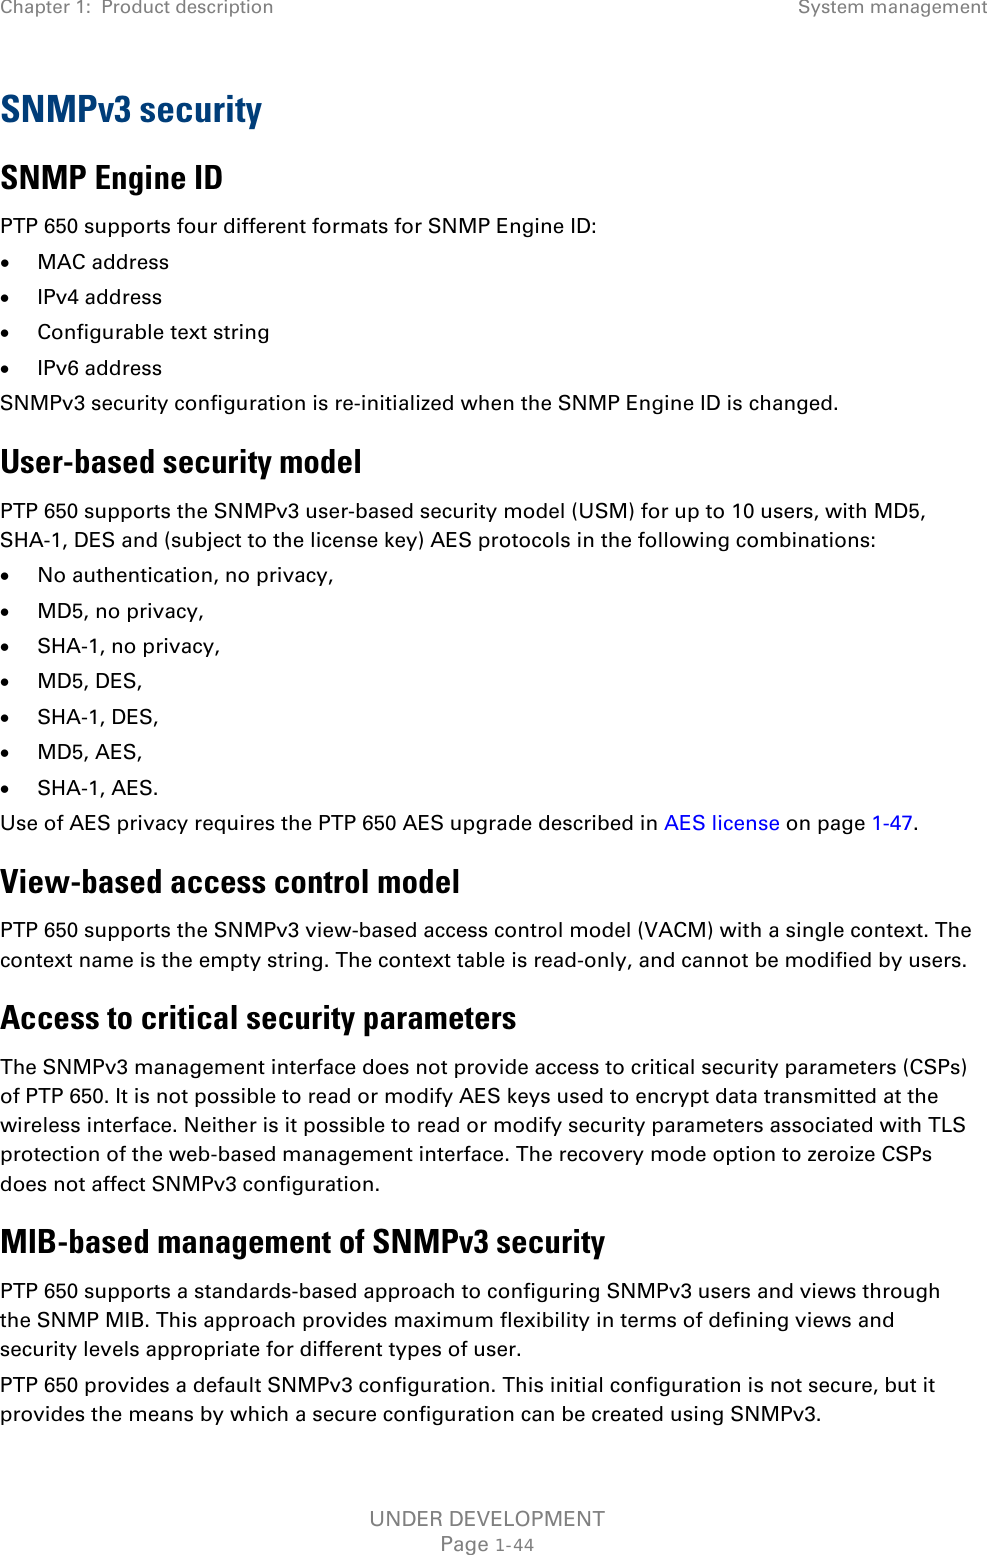 Chapter 1:  Product description System management  SNMPv3 security SNMP Engine ID PTP 650 supports four different formats for SNMP Engine ID: • MAC address • IPv4 address • Configurable text string • IPv6 address SNMPv3 security configuration is re-initialized when the SNMP Engine ID is changed. User-based security model PTP 650 supports the SNMPv3 user-based security model (USM) for up to 10 users, with MD5, SHA-1, DES and (subject to the license key) AES protocols in the following combinations: • No authentication, no privacy, • MD5, no privacy, • SHA-1, no privacy, • MD5, DES, • SHA-1, DES, • MD5, AES, • SHA-1, AES. Use of AES privacy requires the PTP 650 AES upgrade described in AES license on page 1-47. View-based access control model PTP 650 supports the SNMPv3 view-based access control model (VACM) with a single context. The context name is the empty string. The context table is read-only, and cannot be modified by users.  Access to critical security parameters The SNMPv3 management interface does not provide access to critical security parameters (CSPs) of PTP 650. It is not possible to read or modify AES keys used to encrypt data transmitted at the wireless interface. Neither is it possible to read or modify security parameters associated with TLS protection of the web-based management interface. The recovery mode option to zeroize CSPs does not affect SNMPv3 configuration. MIB-based management of SNMPv3 security PTP 650 supports a standards-based approach to configuring SNMPv3 users and views through the SNMP MIB. This approach provides maximum flexibility in terms of defining views and security levels appropriate for different types of user. PTP 650 provides a default SNMPv3 configuration. This initial configuration is not secure, but it provides the means by which a secure configuration can be created using SNMPv3. UNDER DEVELOPMENT Page 1-44 